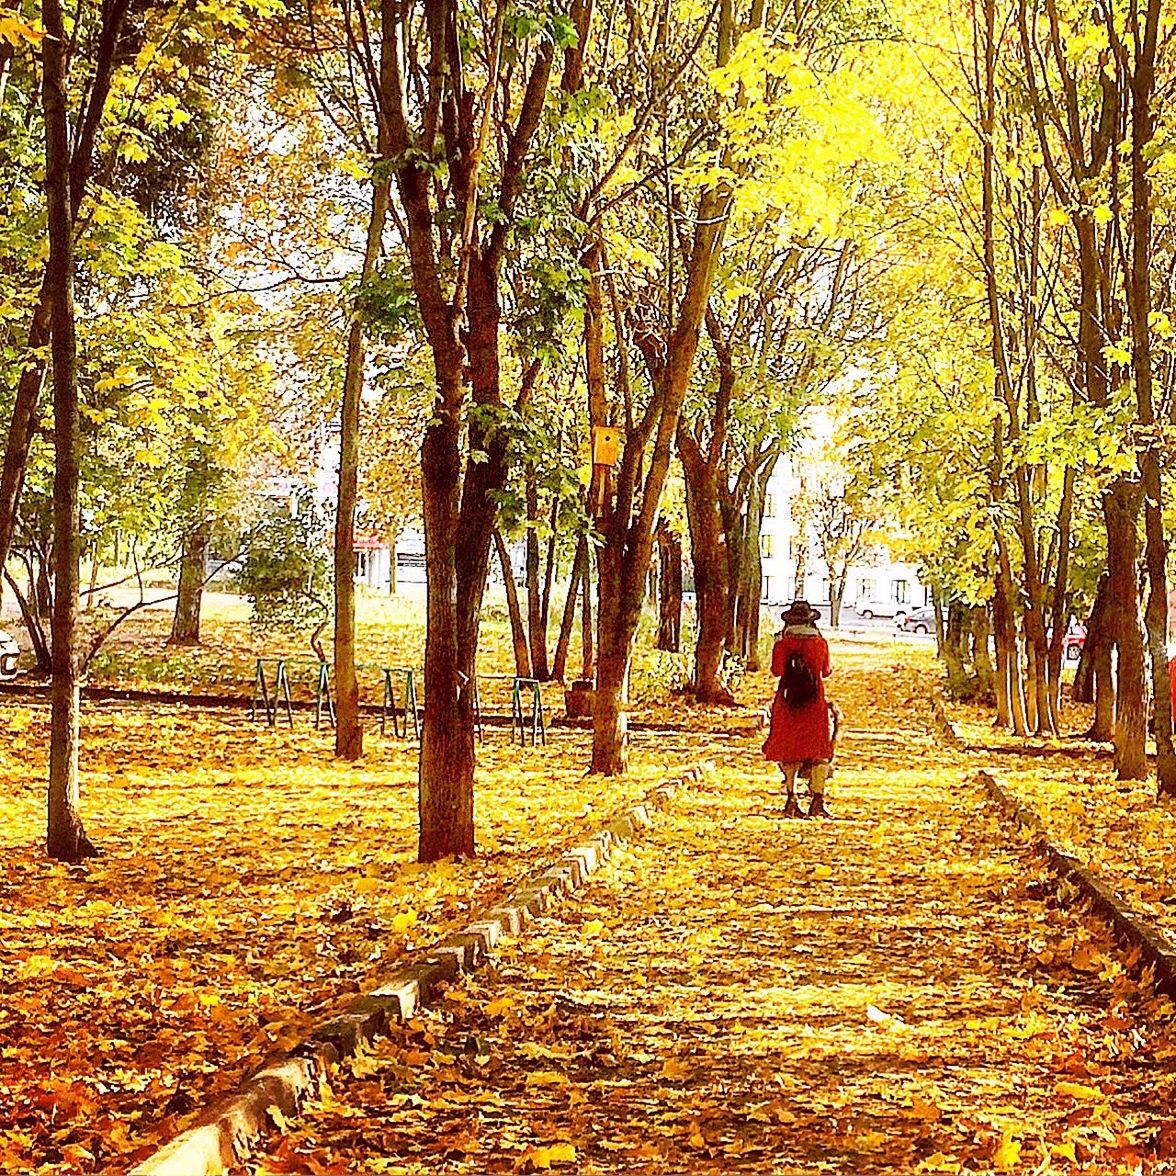 REAR VIEW OF WOMAN WALKING IN AUTUMN TREES